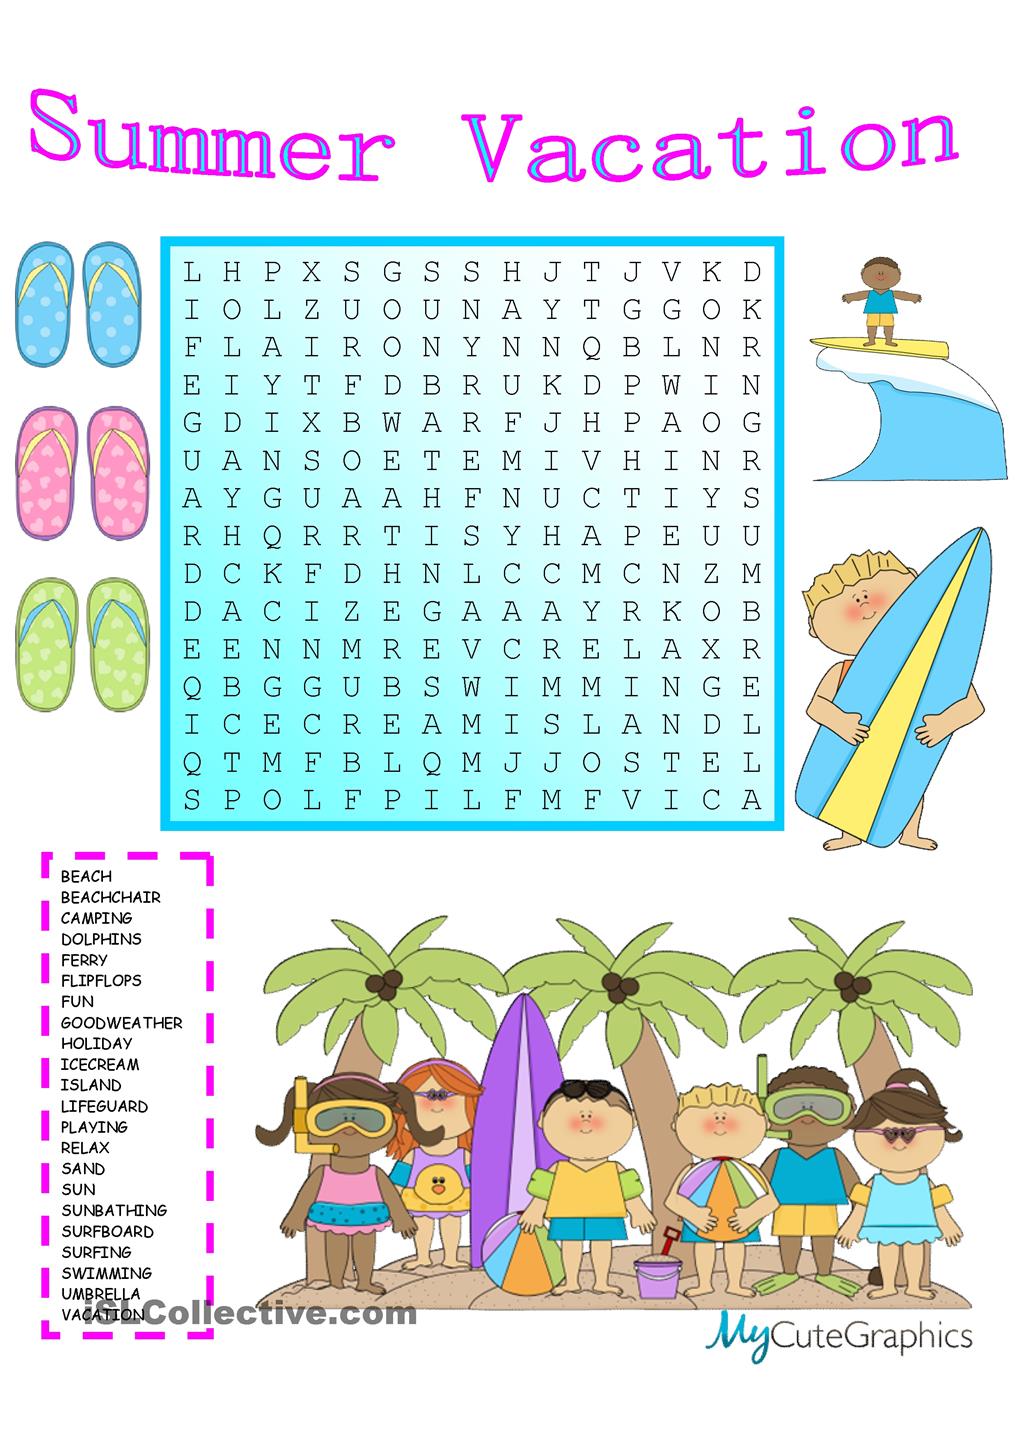 5-free-summer-activity-printable-worksheets-more-than-a-30-frugal